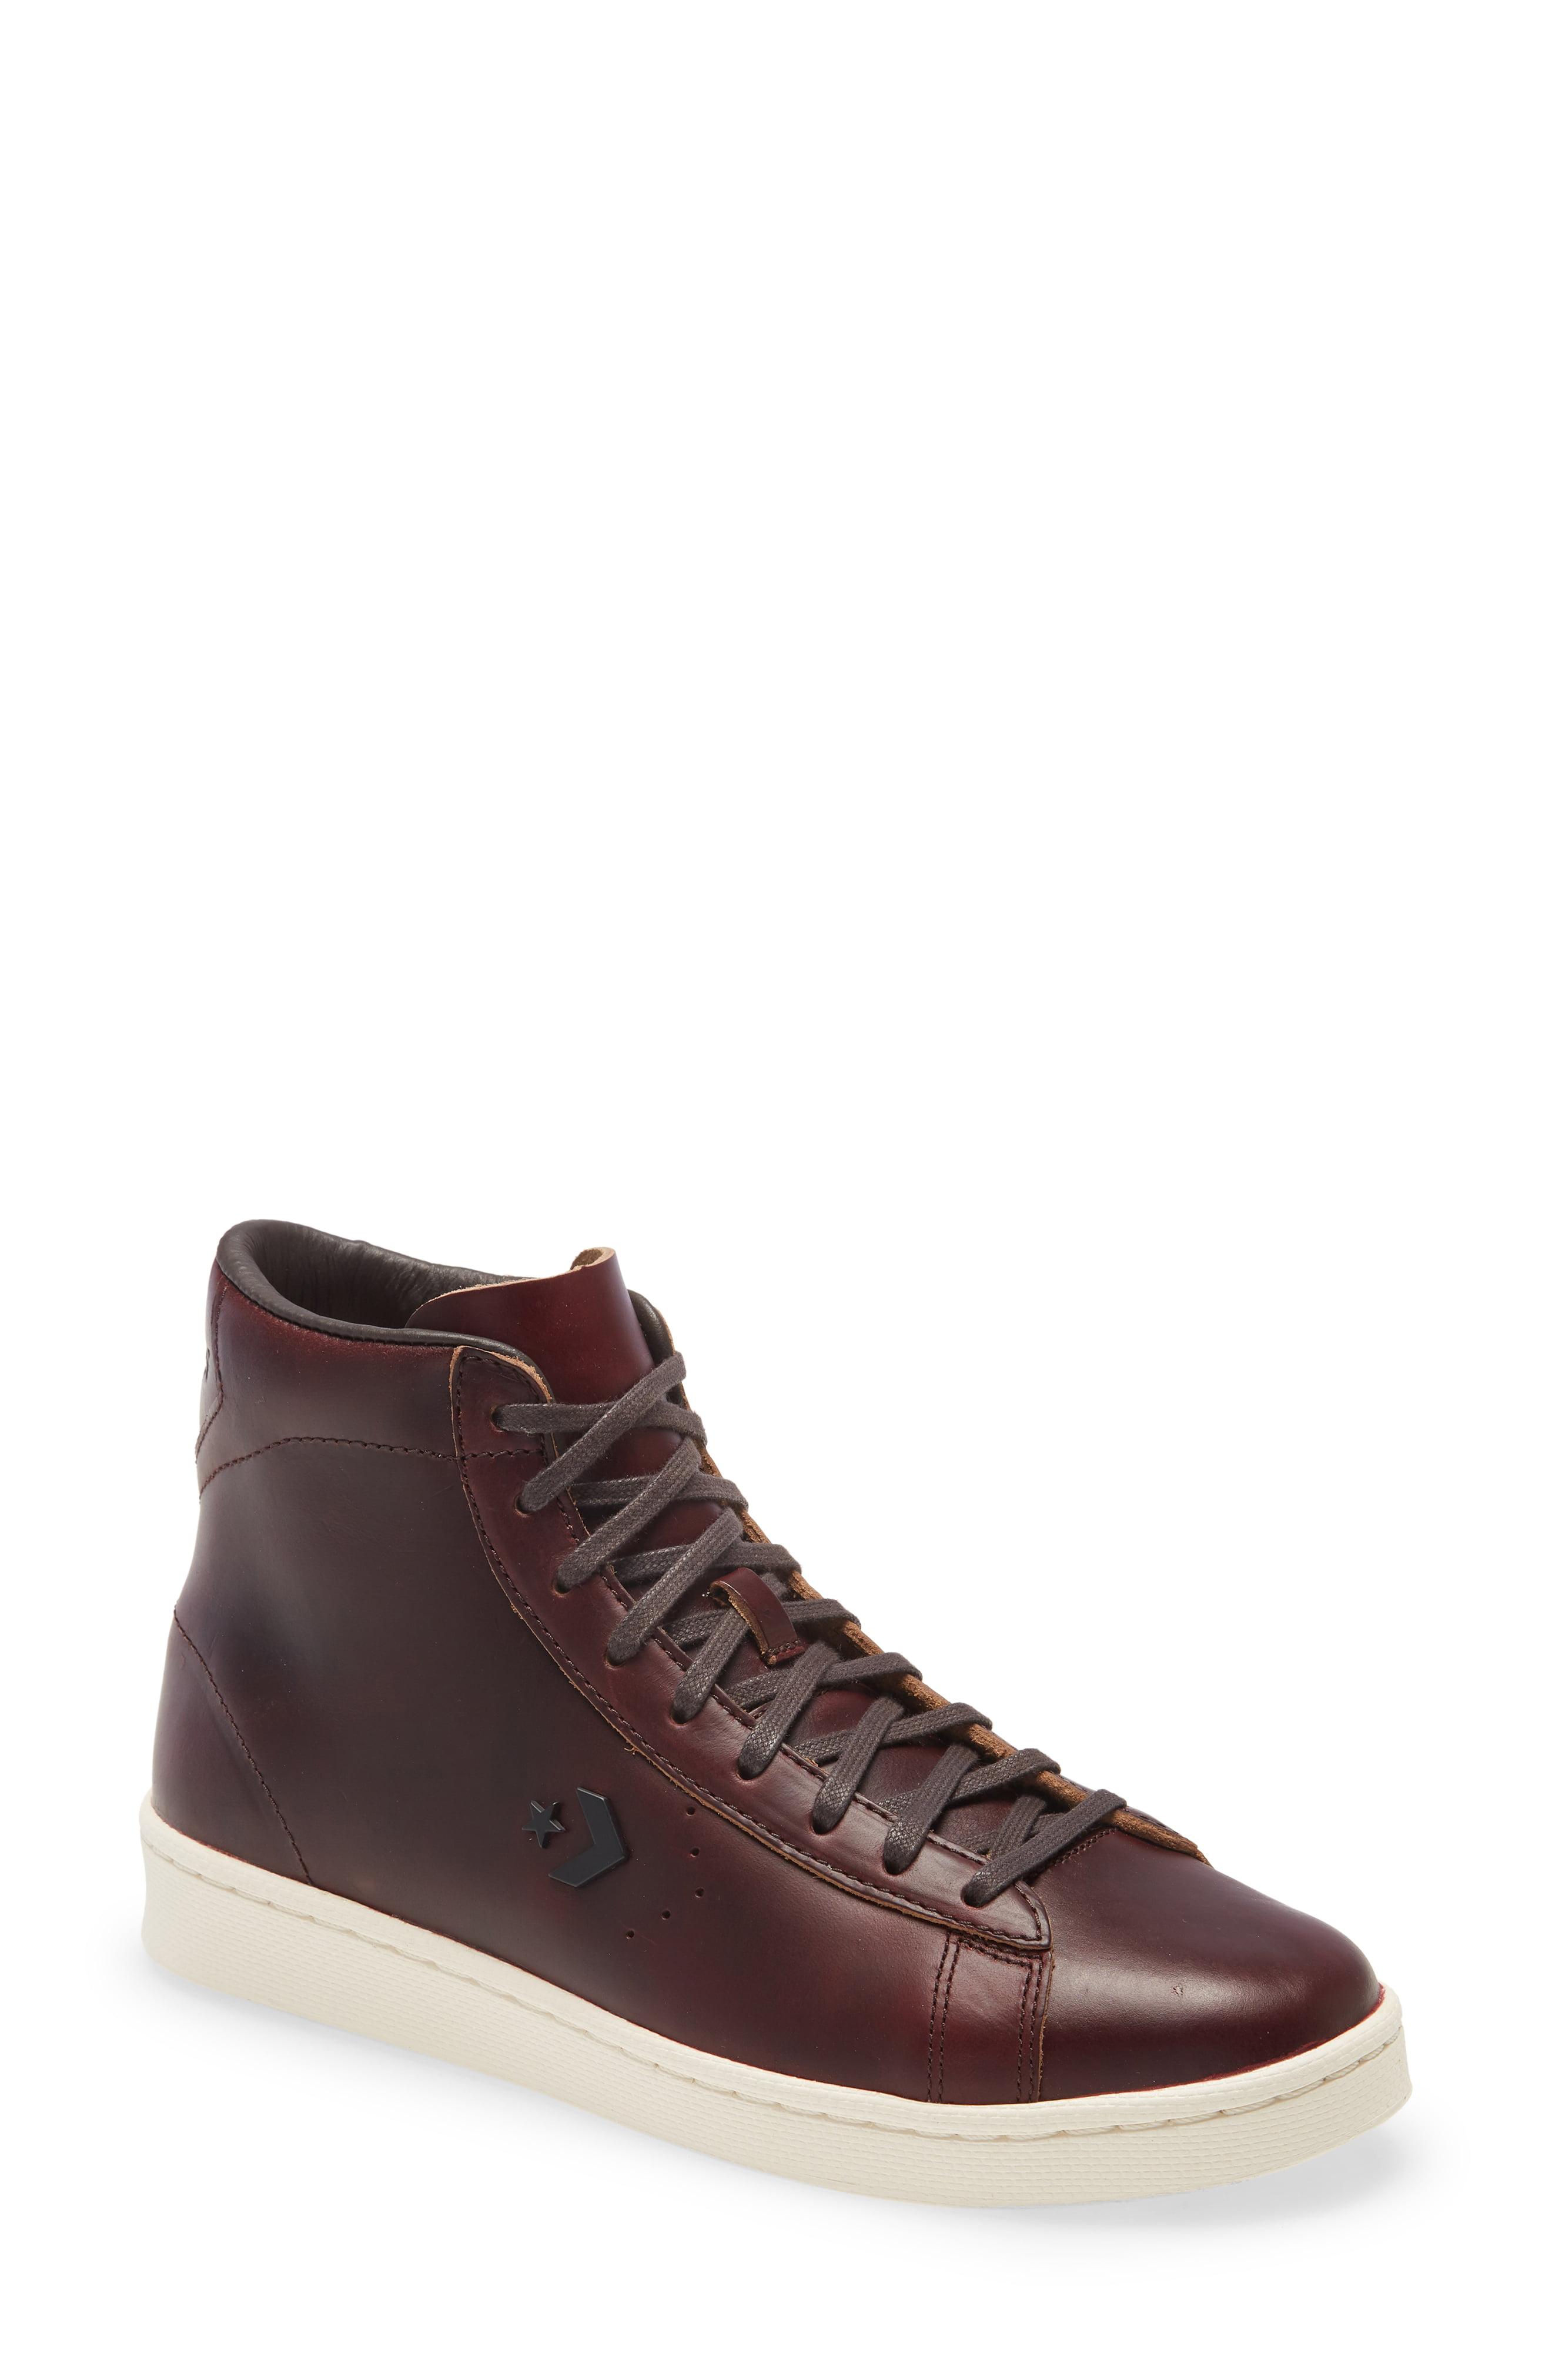 Converse X Horween Pro Leather High Top Sneaker in Brown for Men - Lyst